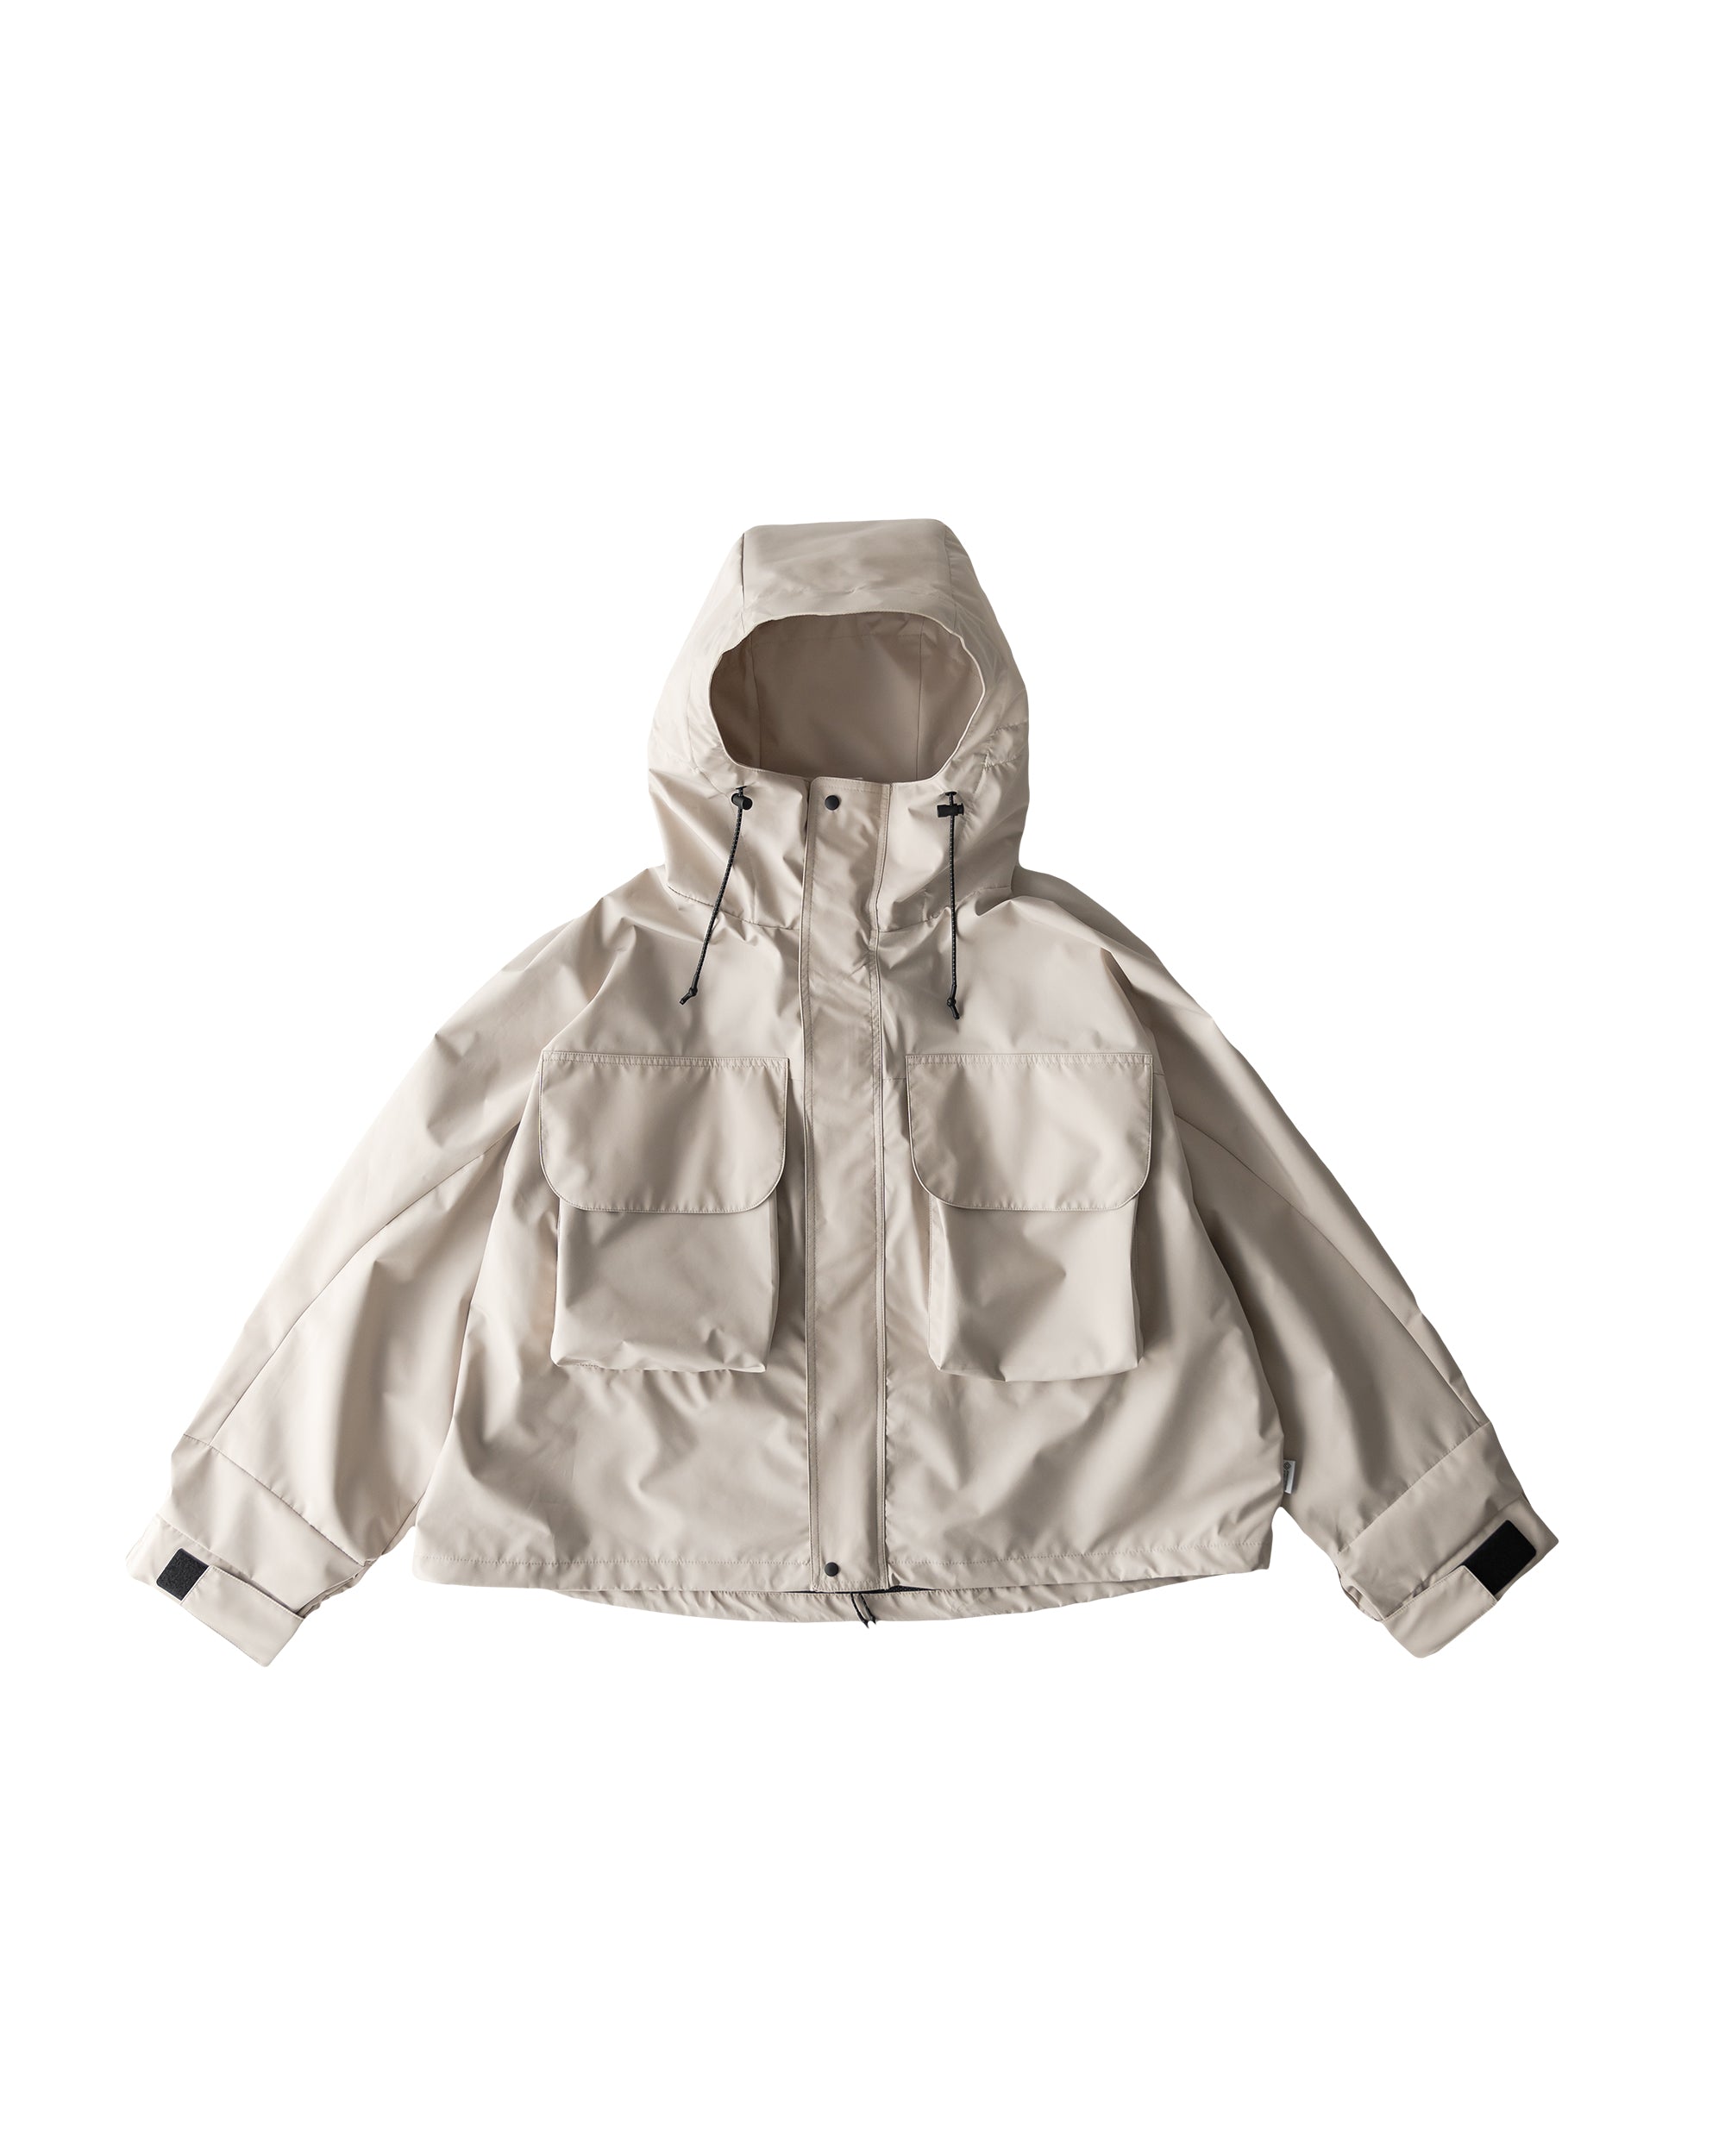 【2.23 fri 20:00- In stock】+phenix WINDSTOPPER® by GORE-TEX LABS CITY WADING JACKET